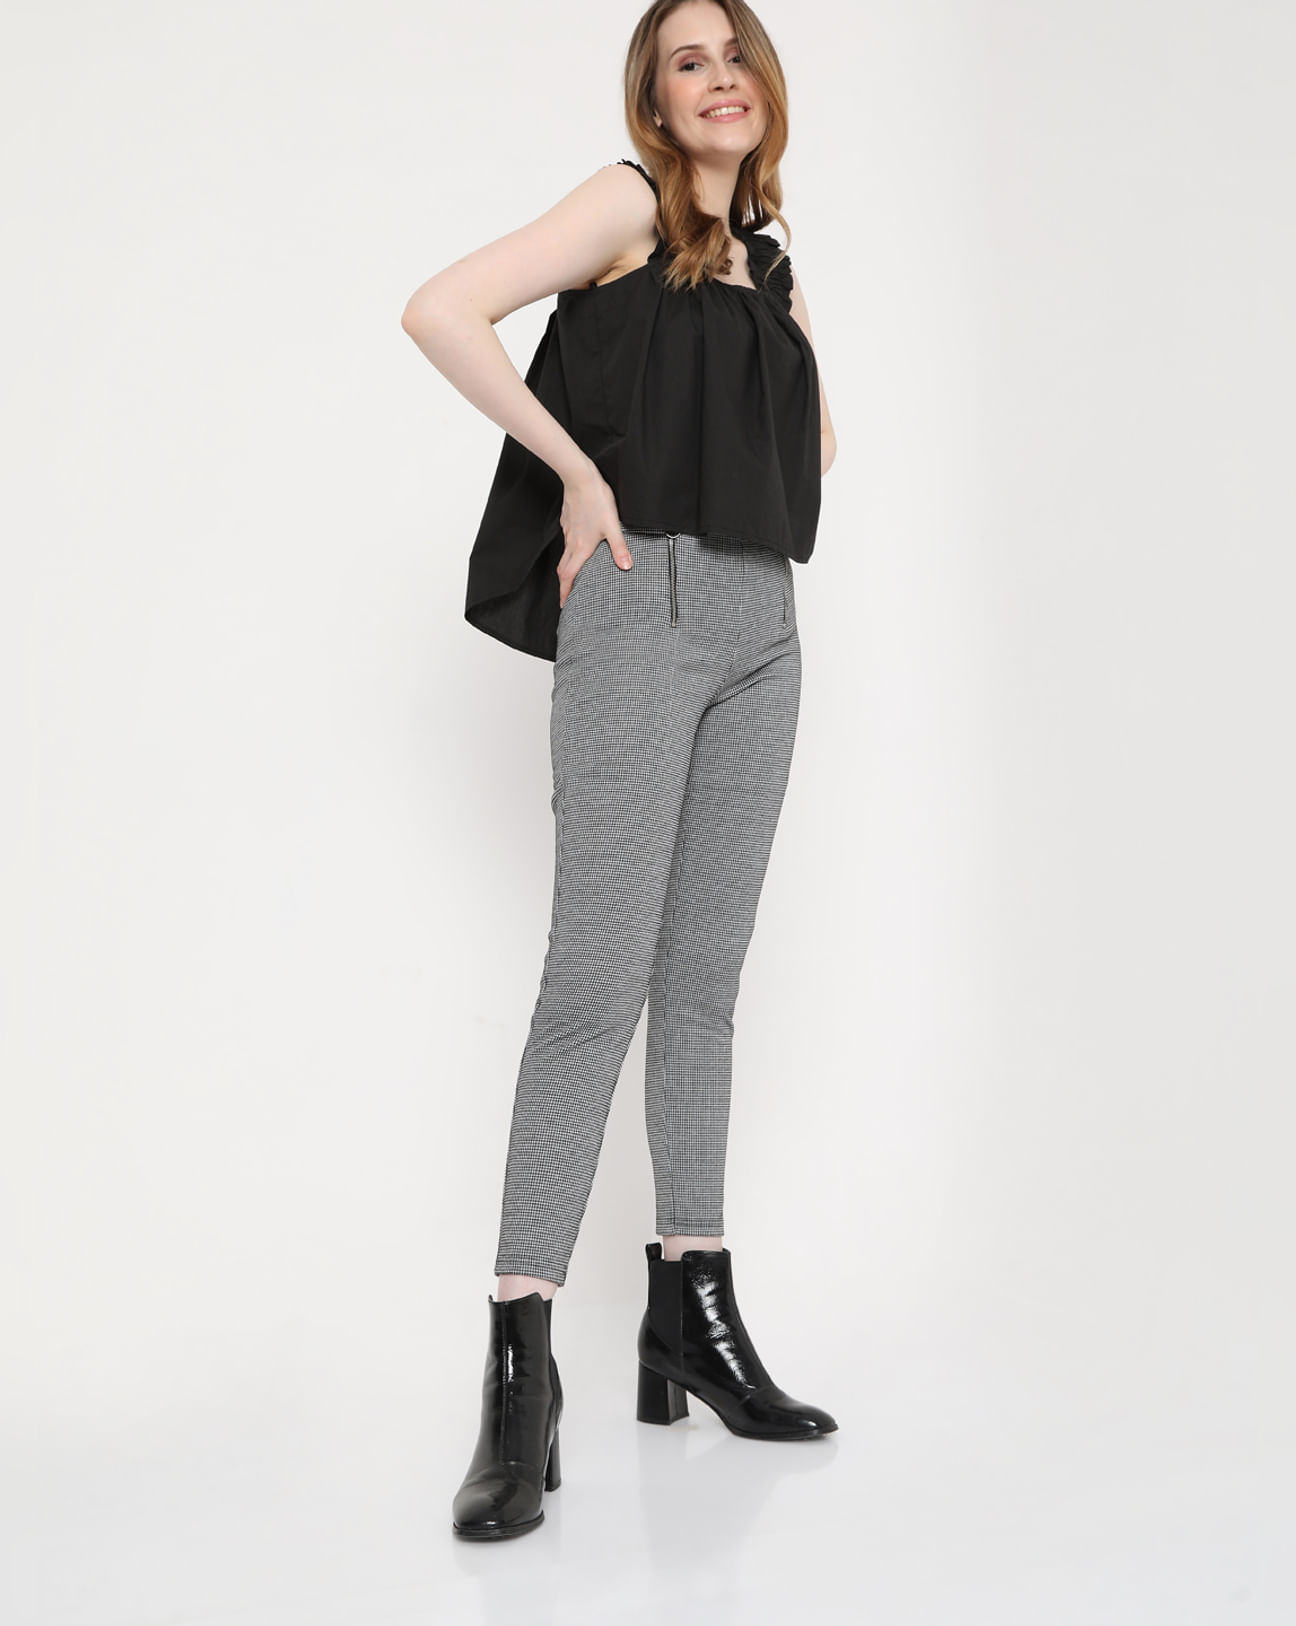 Buy Black High Rise Houndstooth Jeggings Online In India.